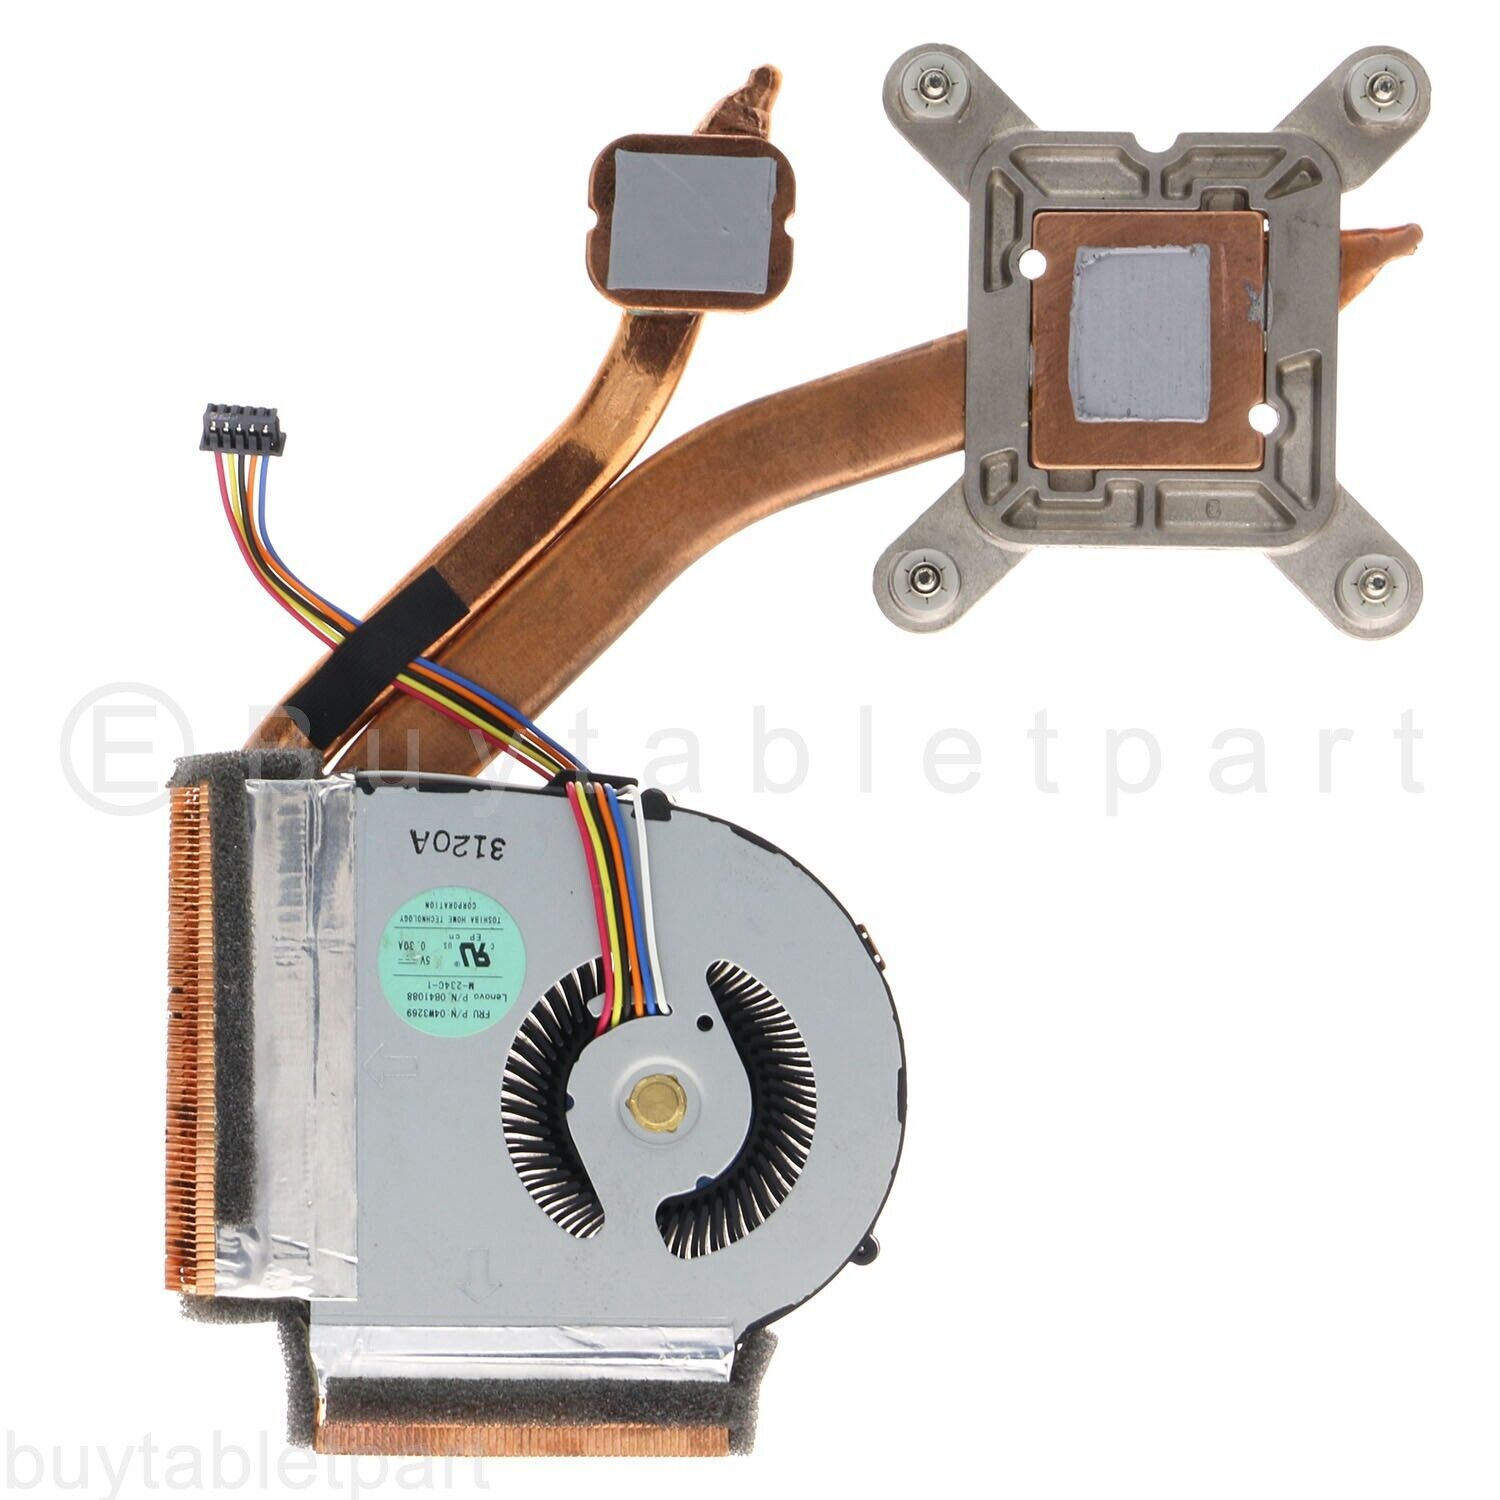 NEW For Lenovo IBM ThinkPad T430 T430i Cpu Cooling Fan with Heatsink 04W3269